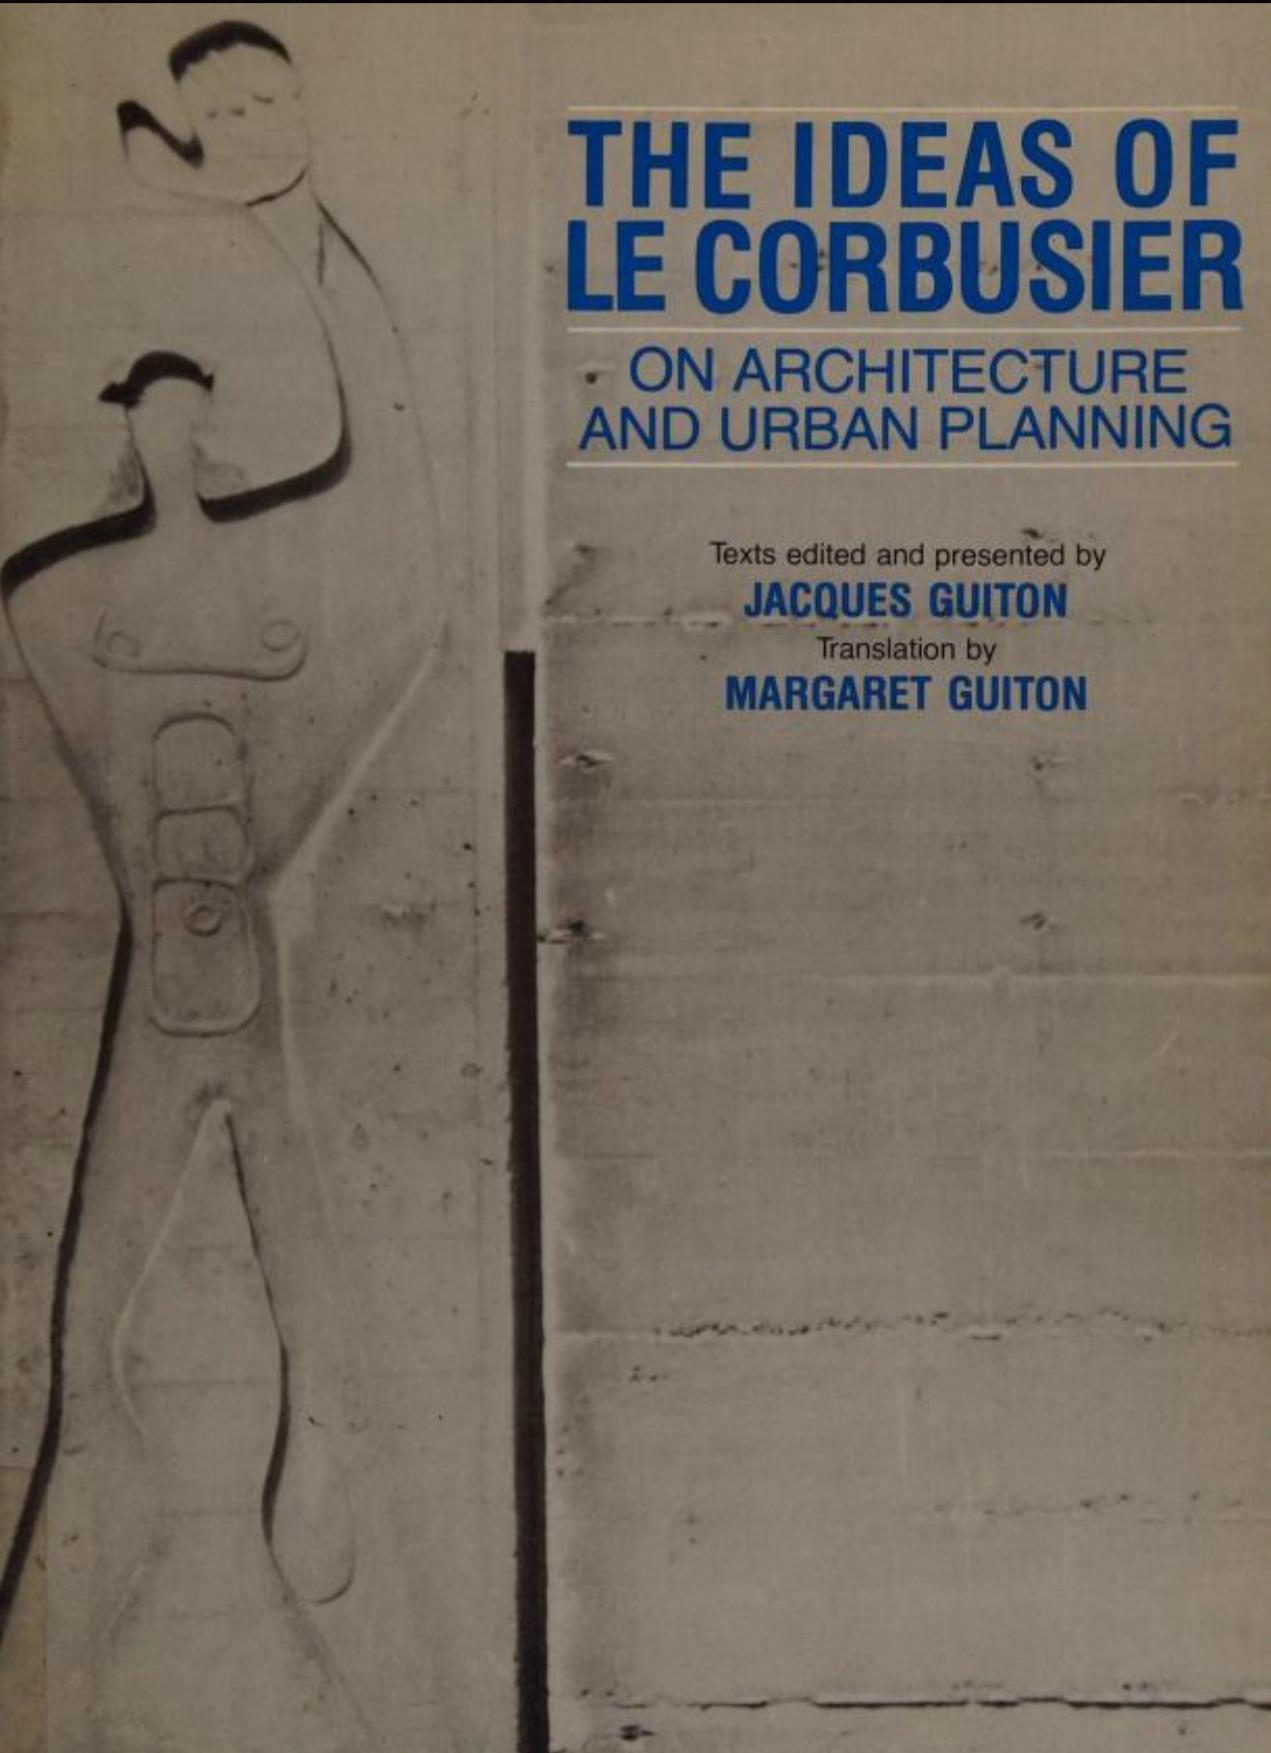 The Ideas of Le Corbusier: Architecture and Urban Planning by Jacques Guiton